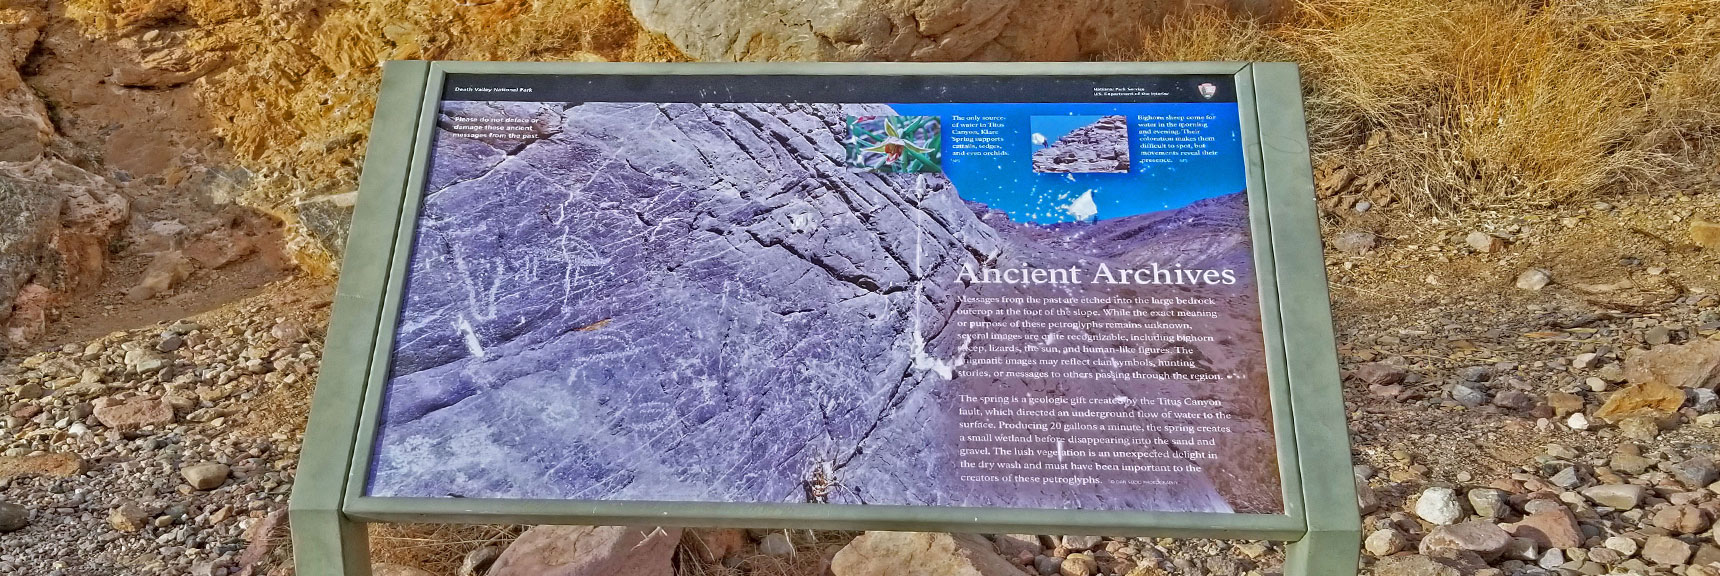 Interpretive Sign at Ancient Petroglyph Rocks. | Titus Canyon Grand Loop by Mountain Bike | Death Valley National Park, California